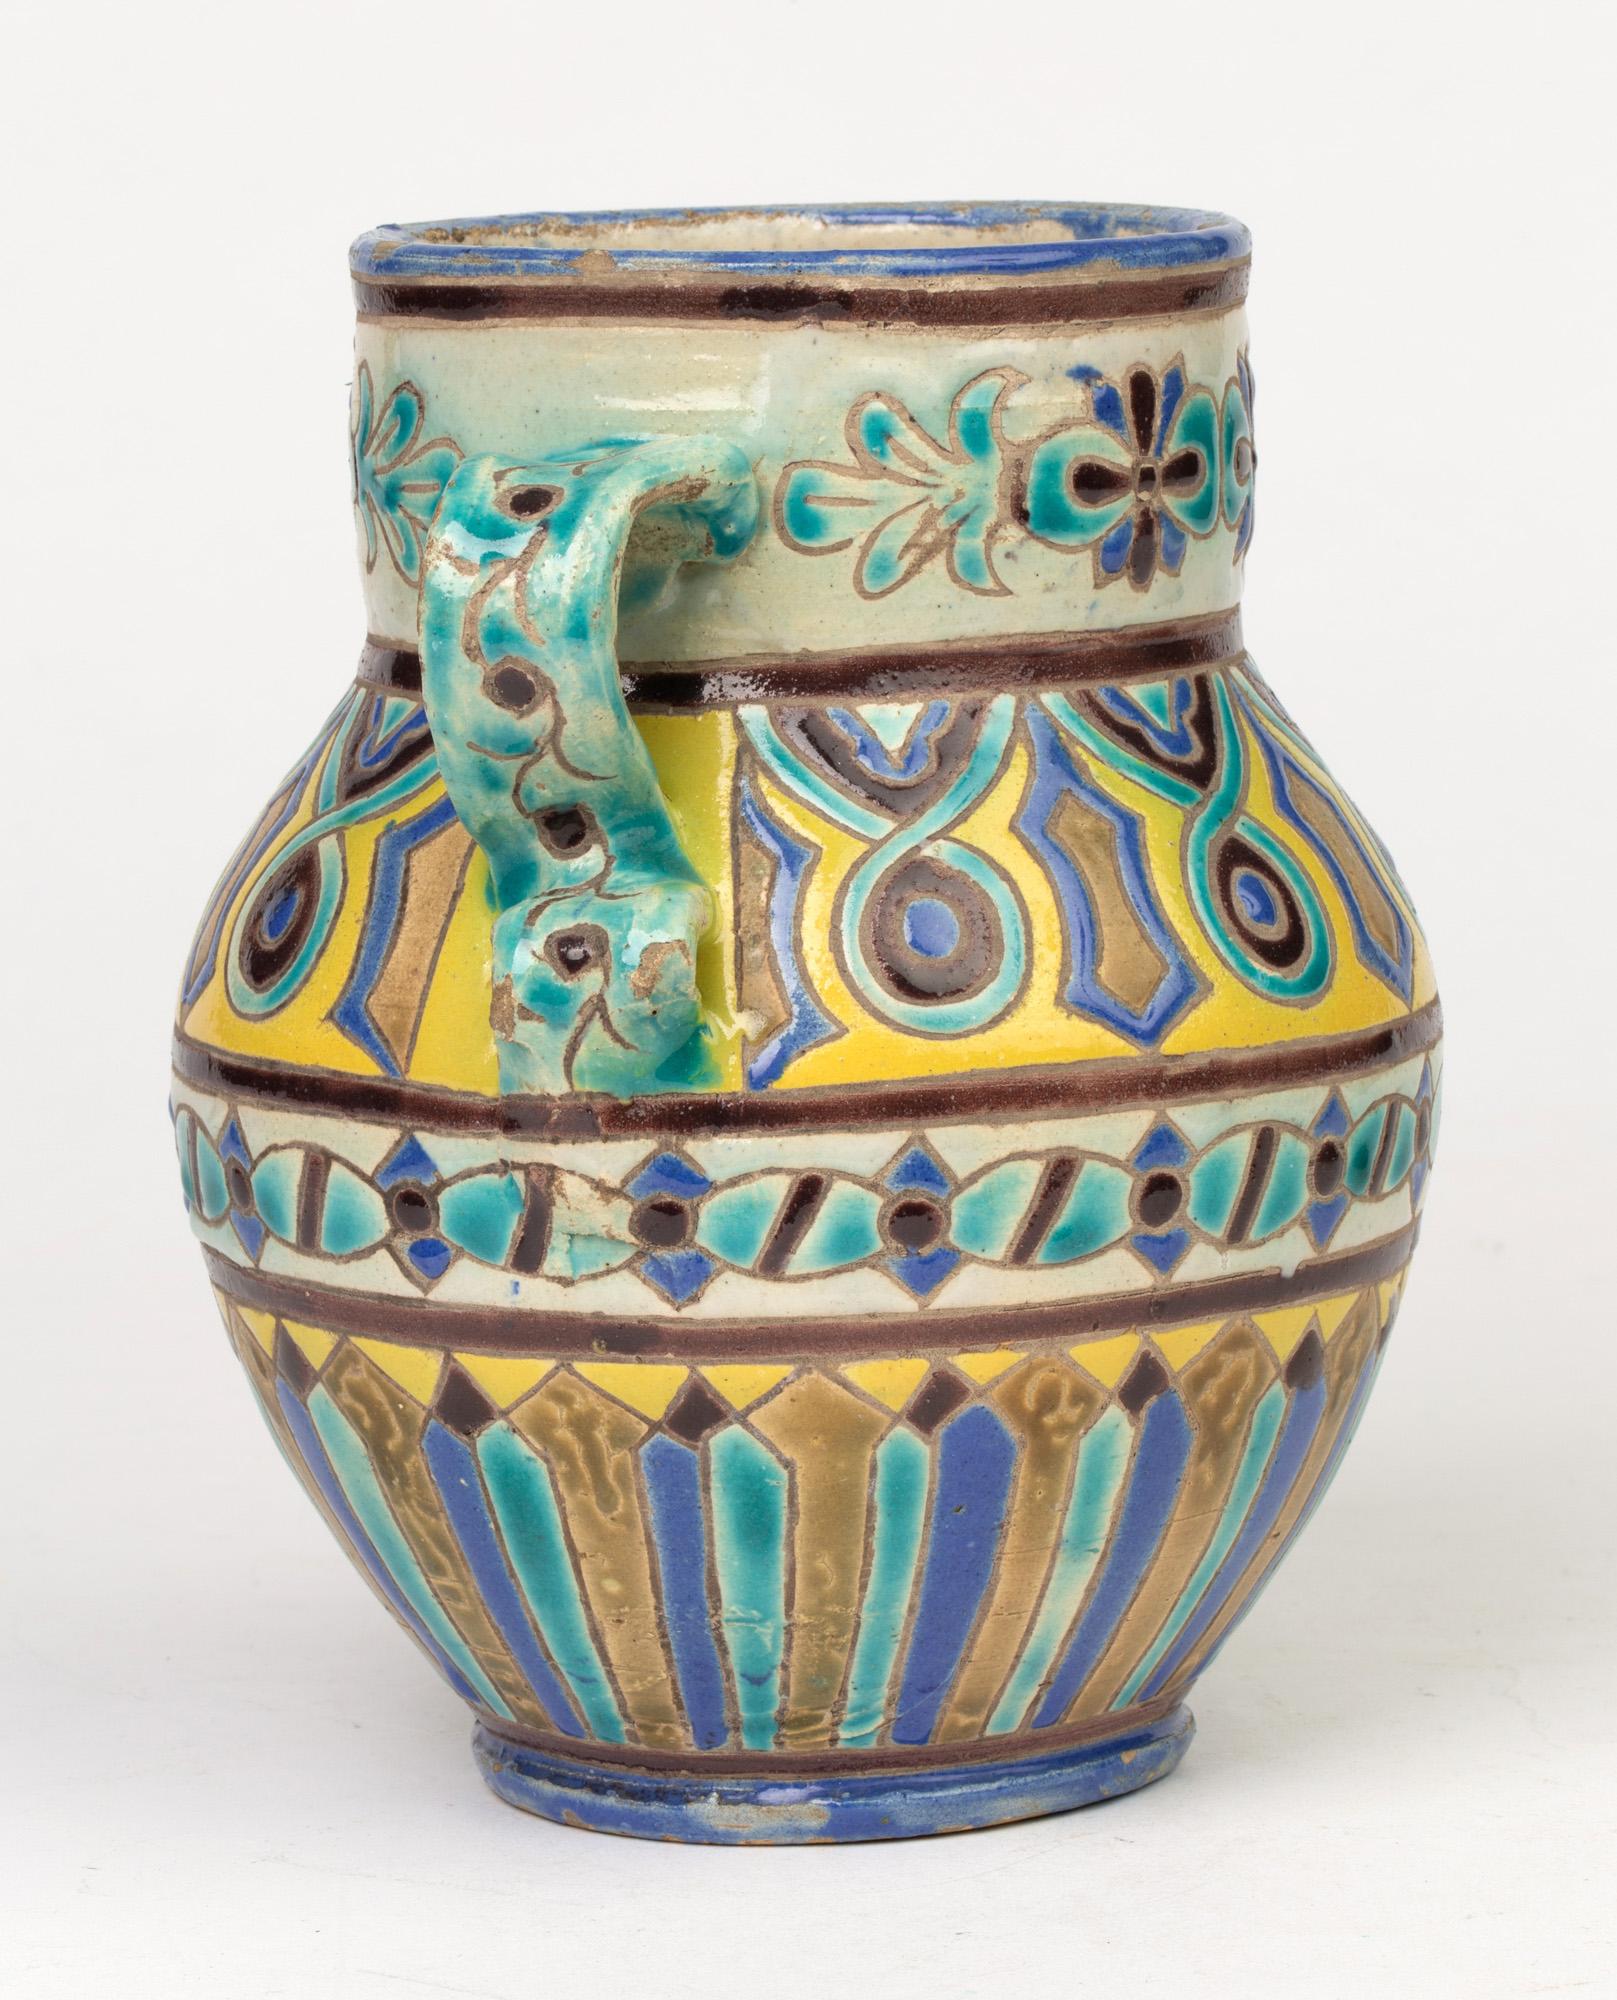 A stylish antique tin glazed twin handled pottery vase believed to be of Mediterranean, probably Spanish, origin but with Iznik style designs dating from the 19th century. The lightly potted vase is of urn shape with a narrow rounded foot, rounded